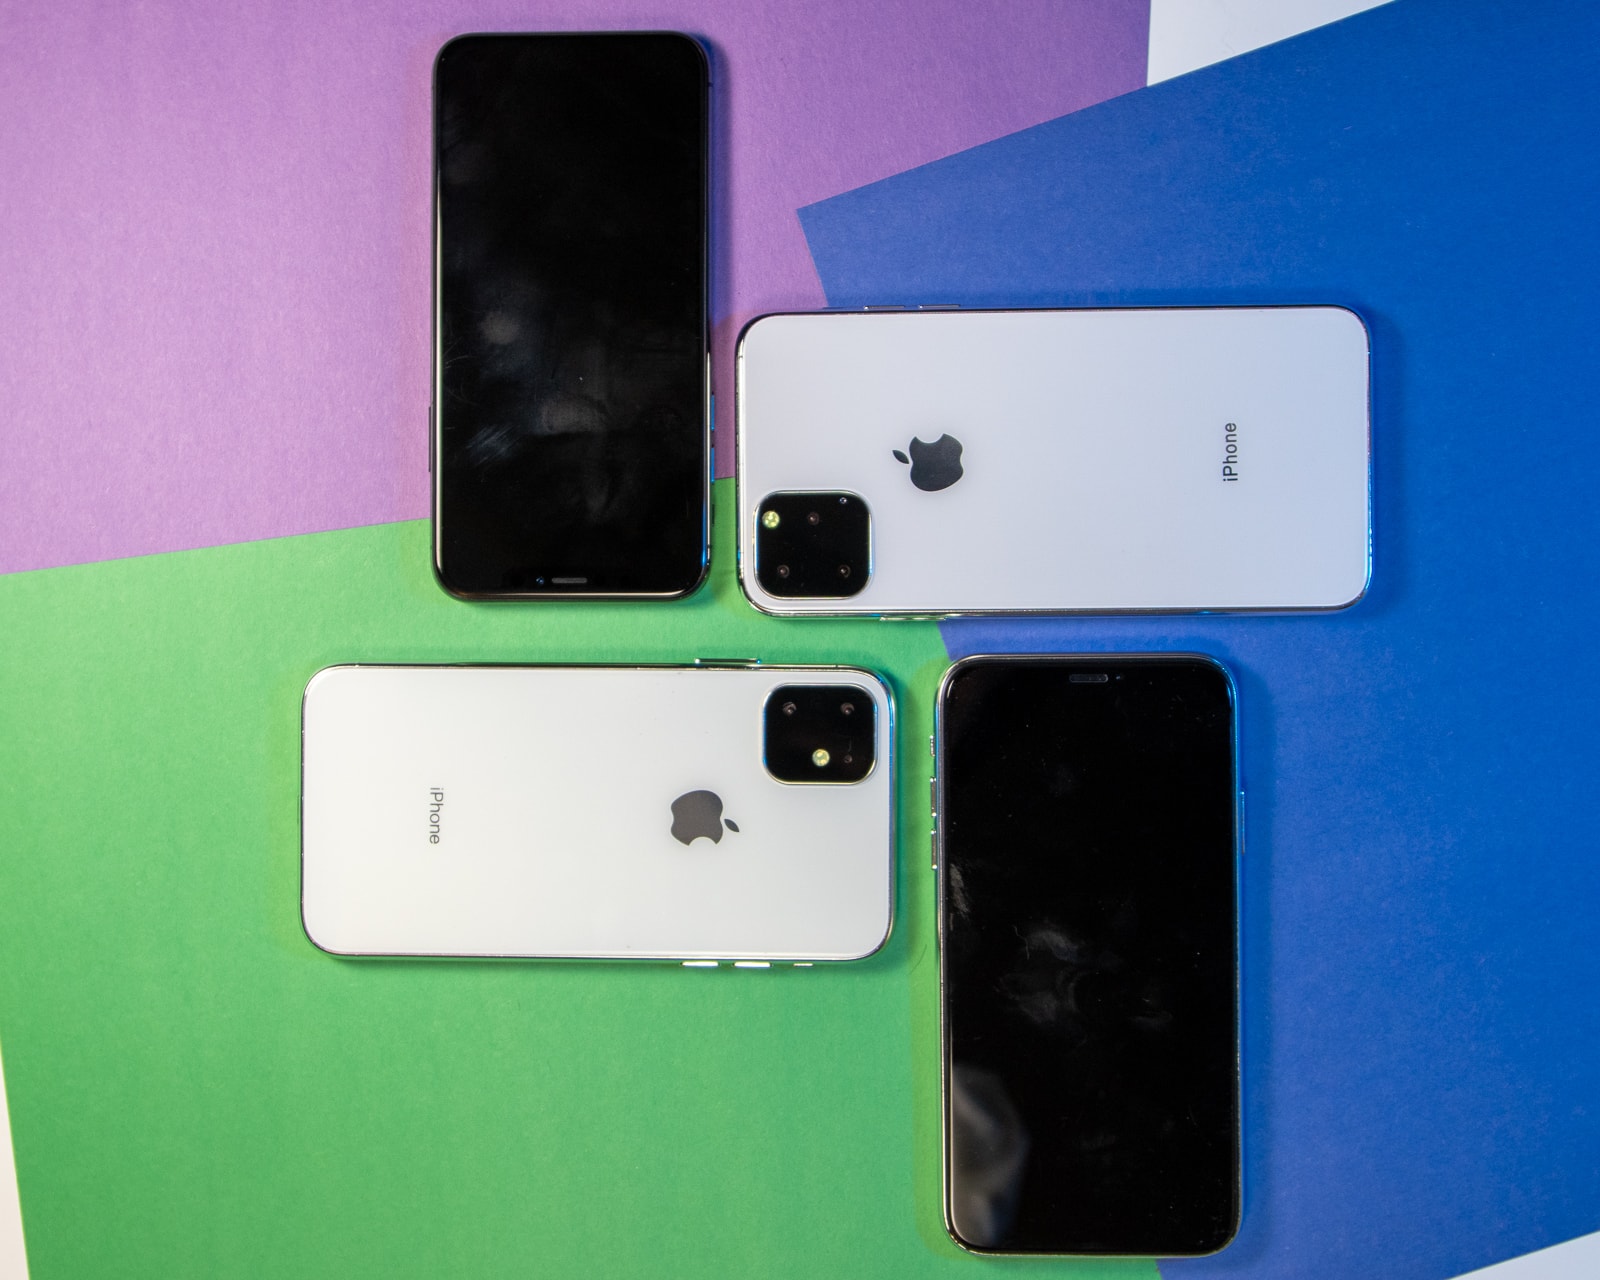 iPhone 10 and iPhone 11 models on colorful background